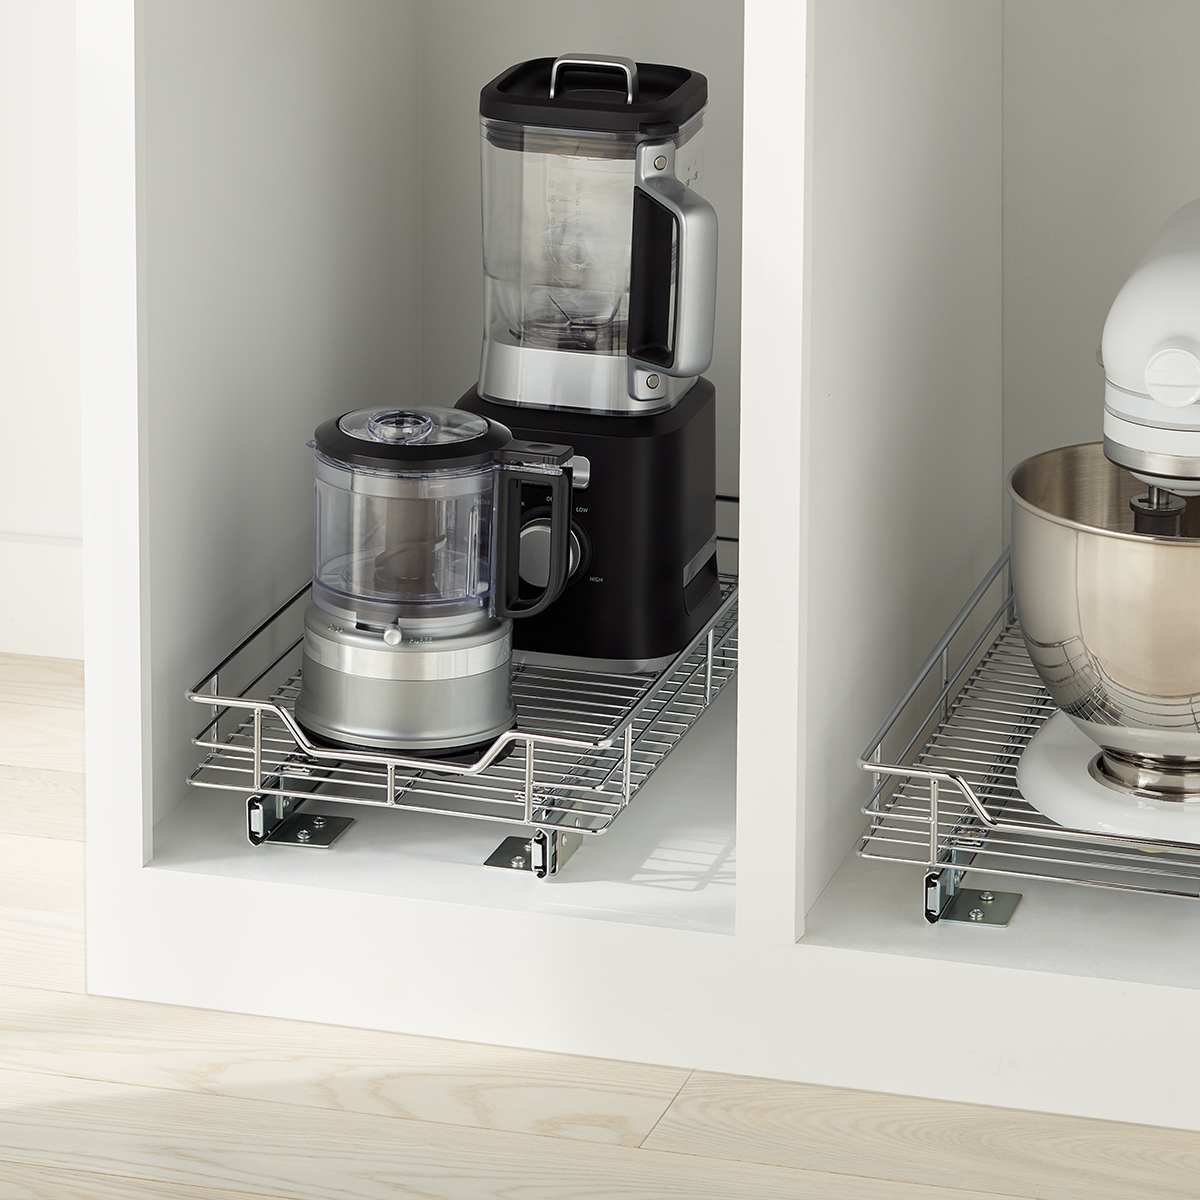 https://www.containerstore.com/catalogimages/407005/10083740-roll-out-cabinet-drawer-11i.jpg